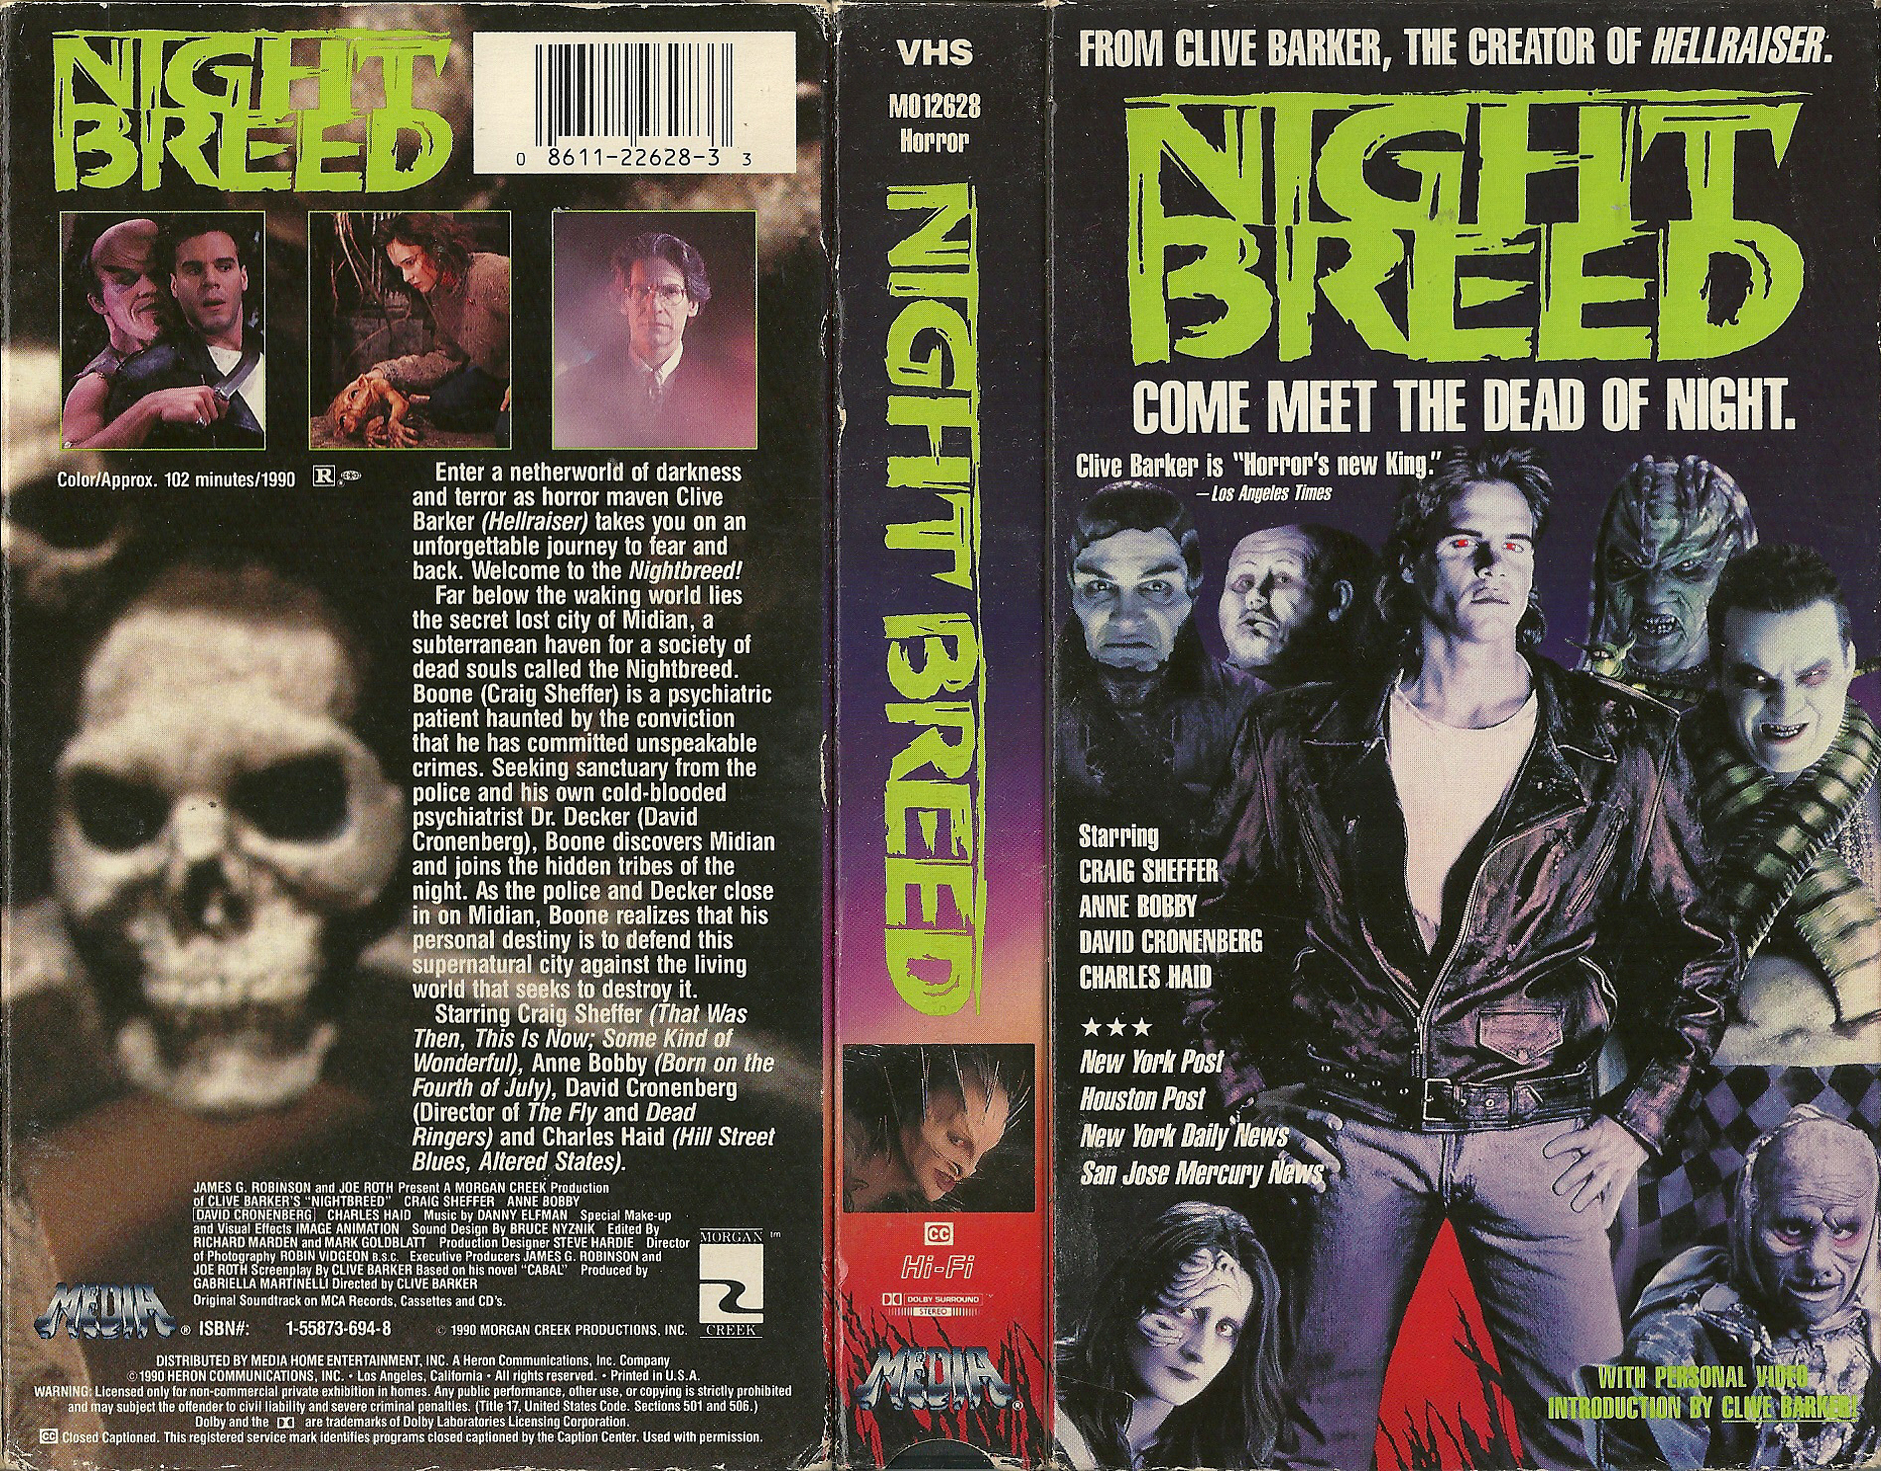 VHS Covers. 